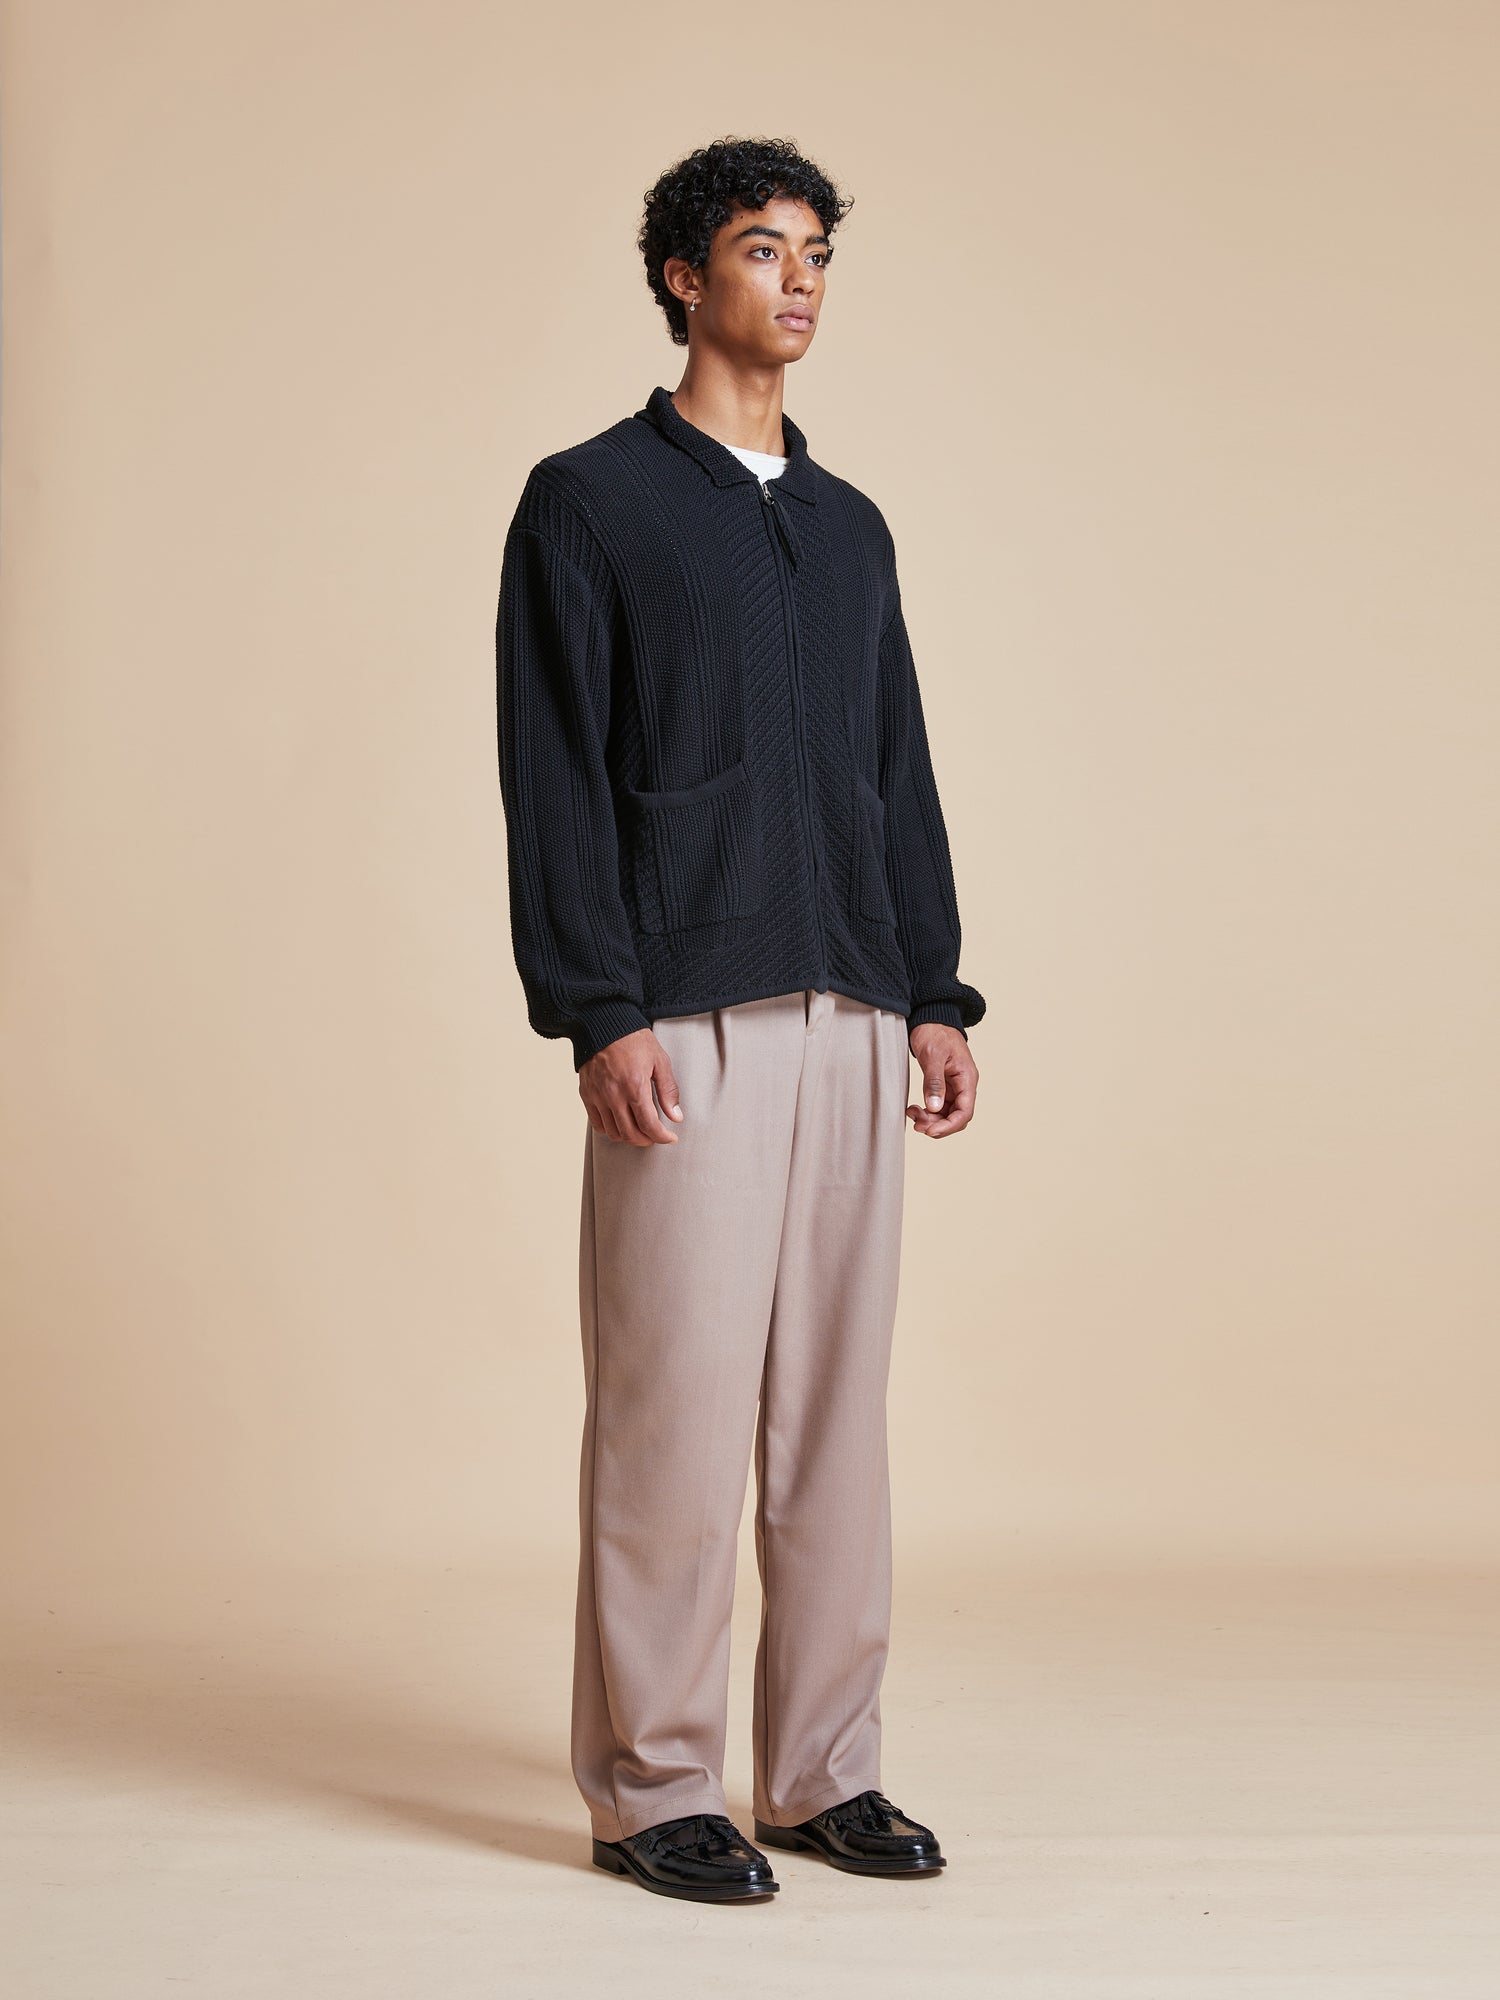 The model is wearing a Found Zip Up Panel Knit Ribbed Sweater.